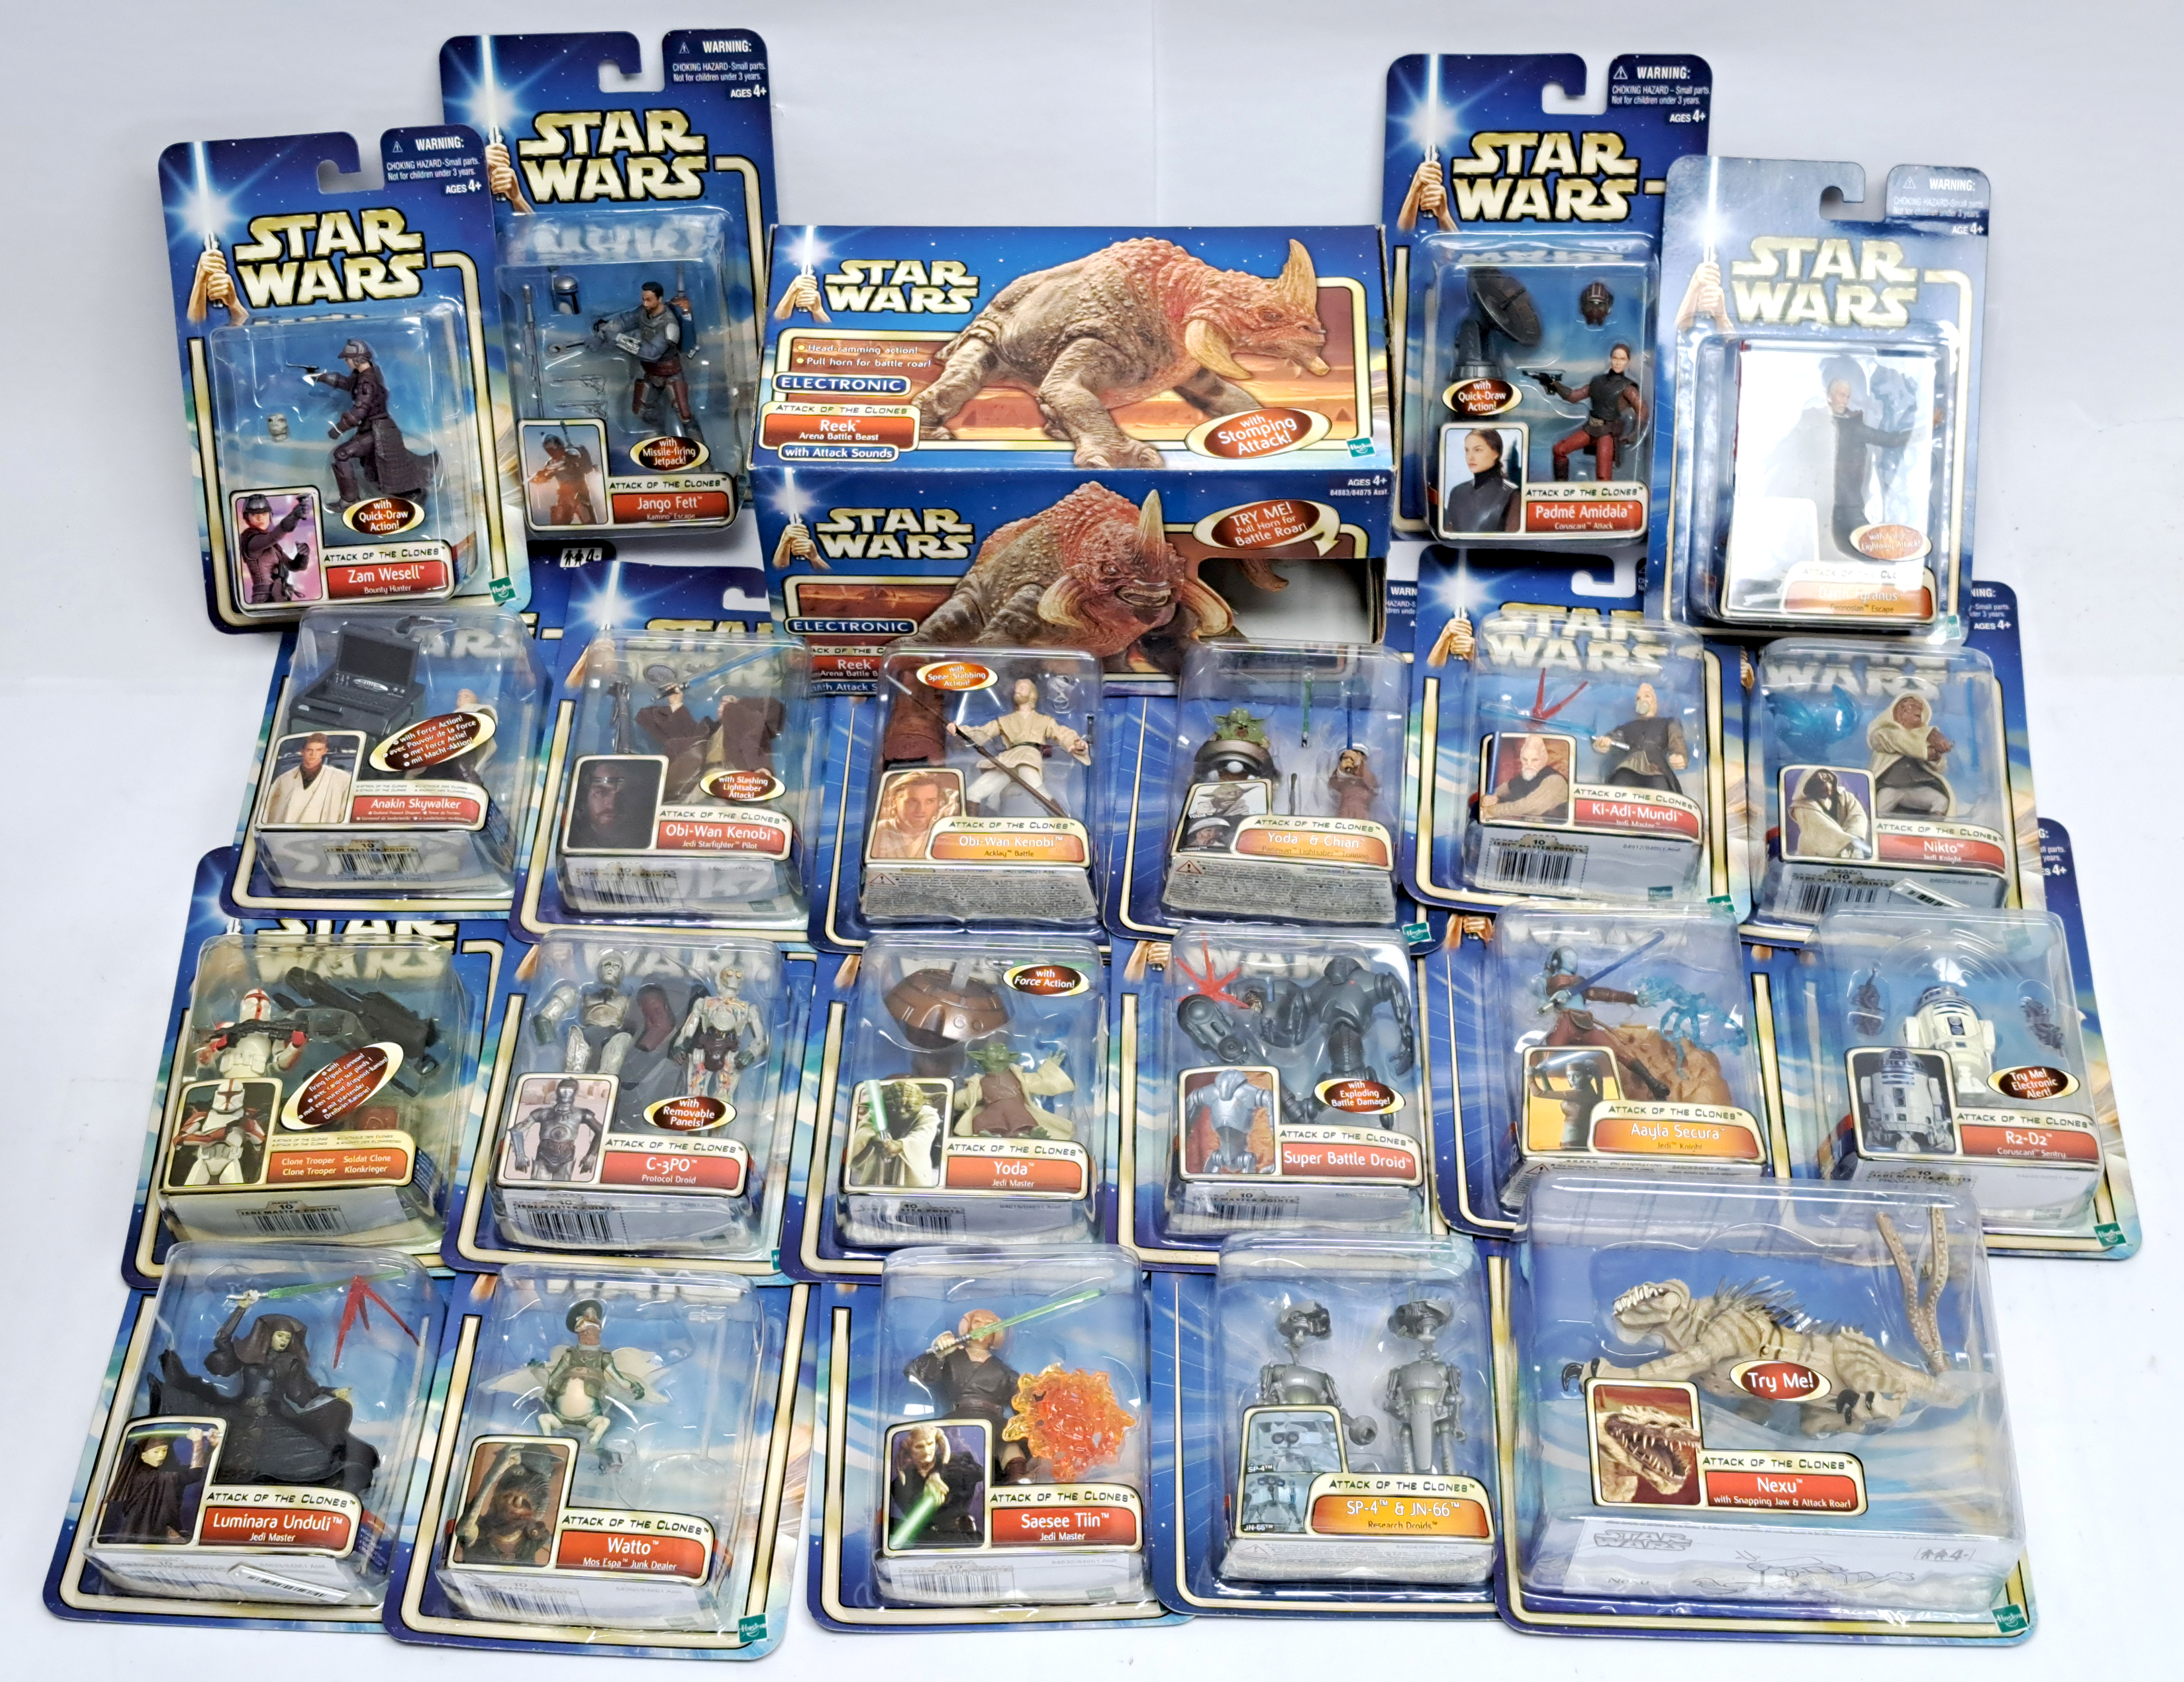 Star Wars Attack of the Clones 23 x Sealed figures plus Reek and Nexu creatures sealed